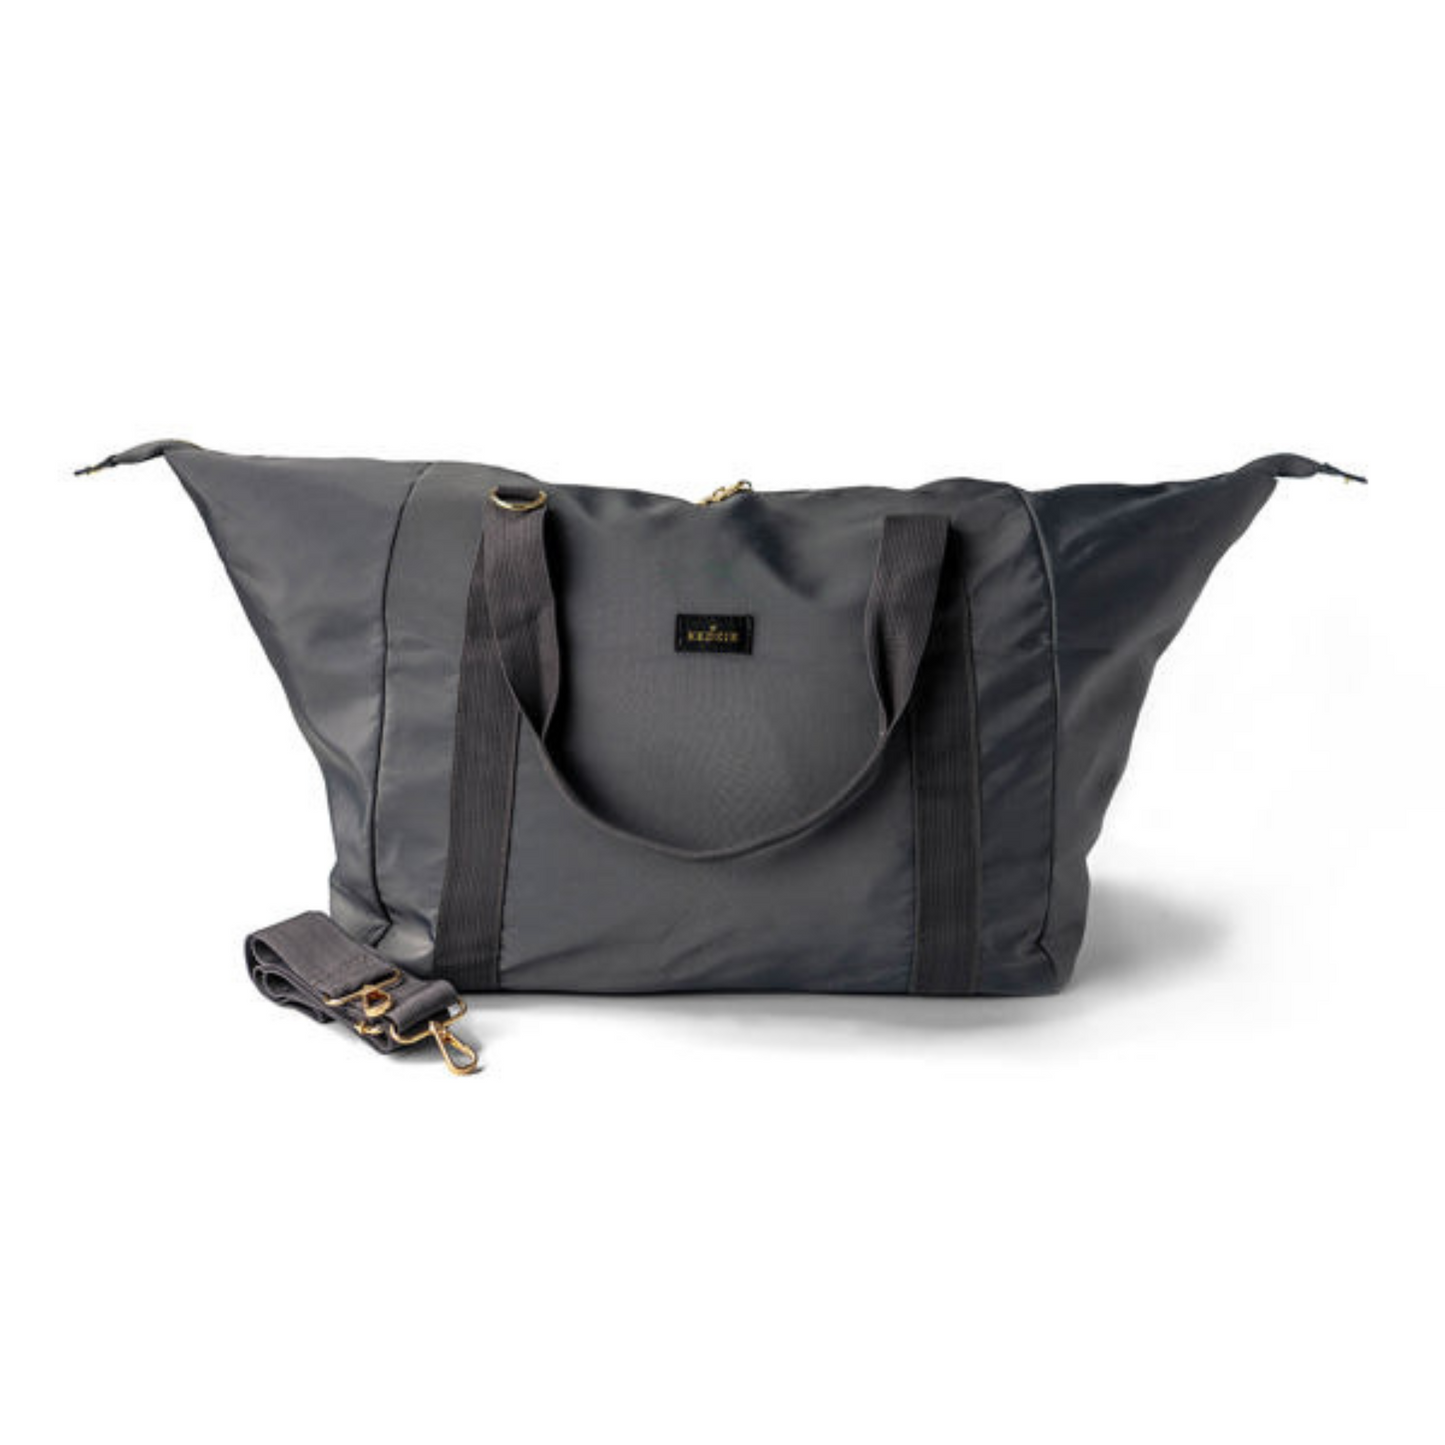 Kenzie foldable duffle bag in charcoal color